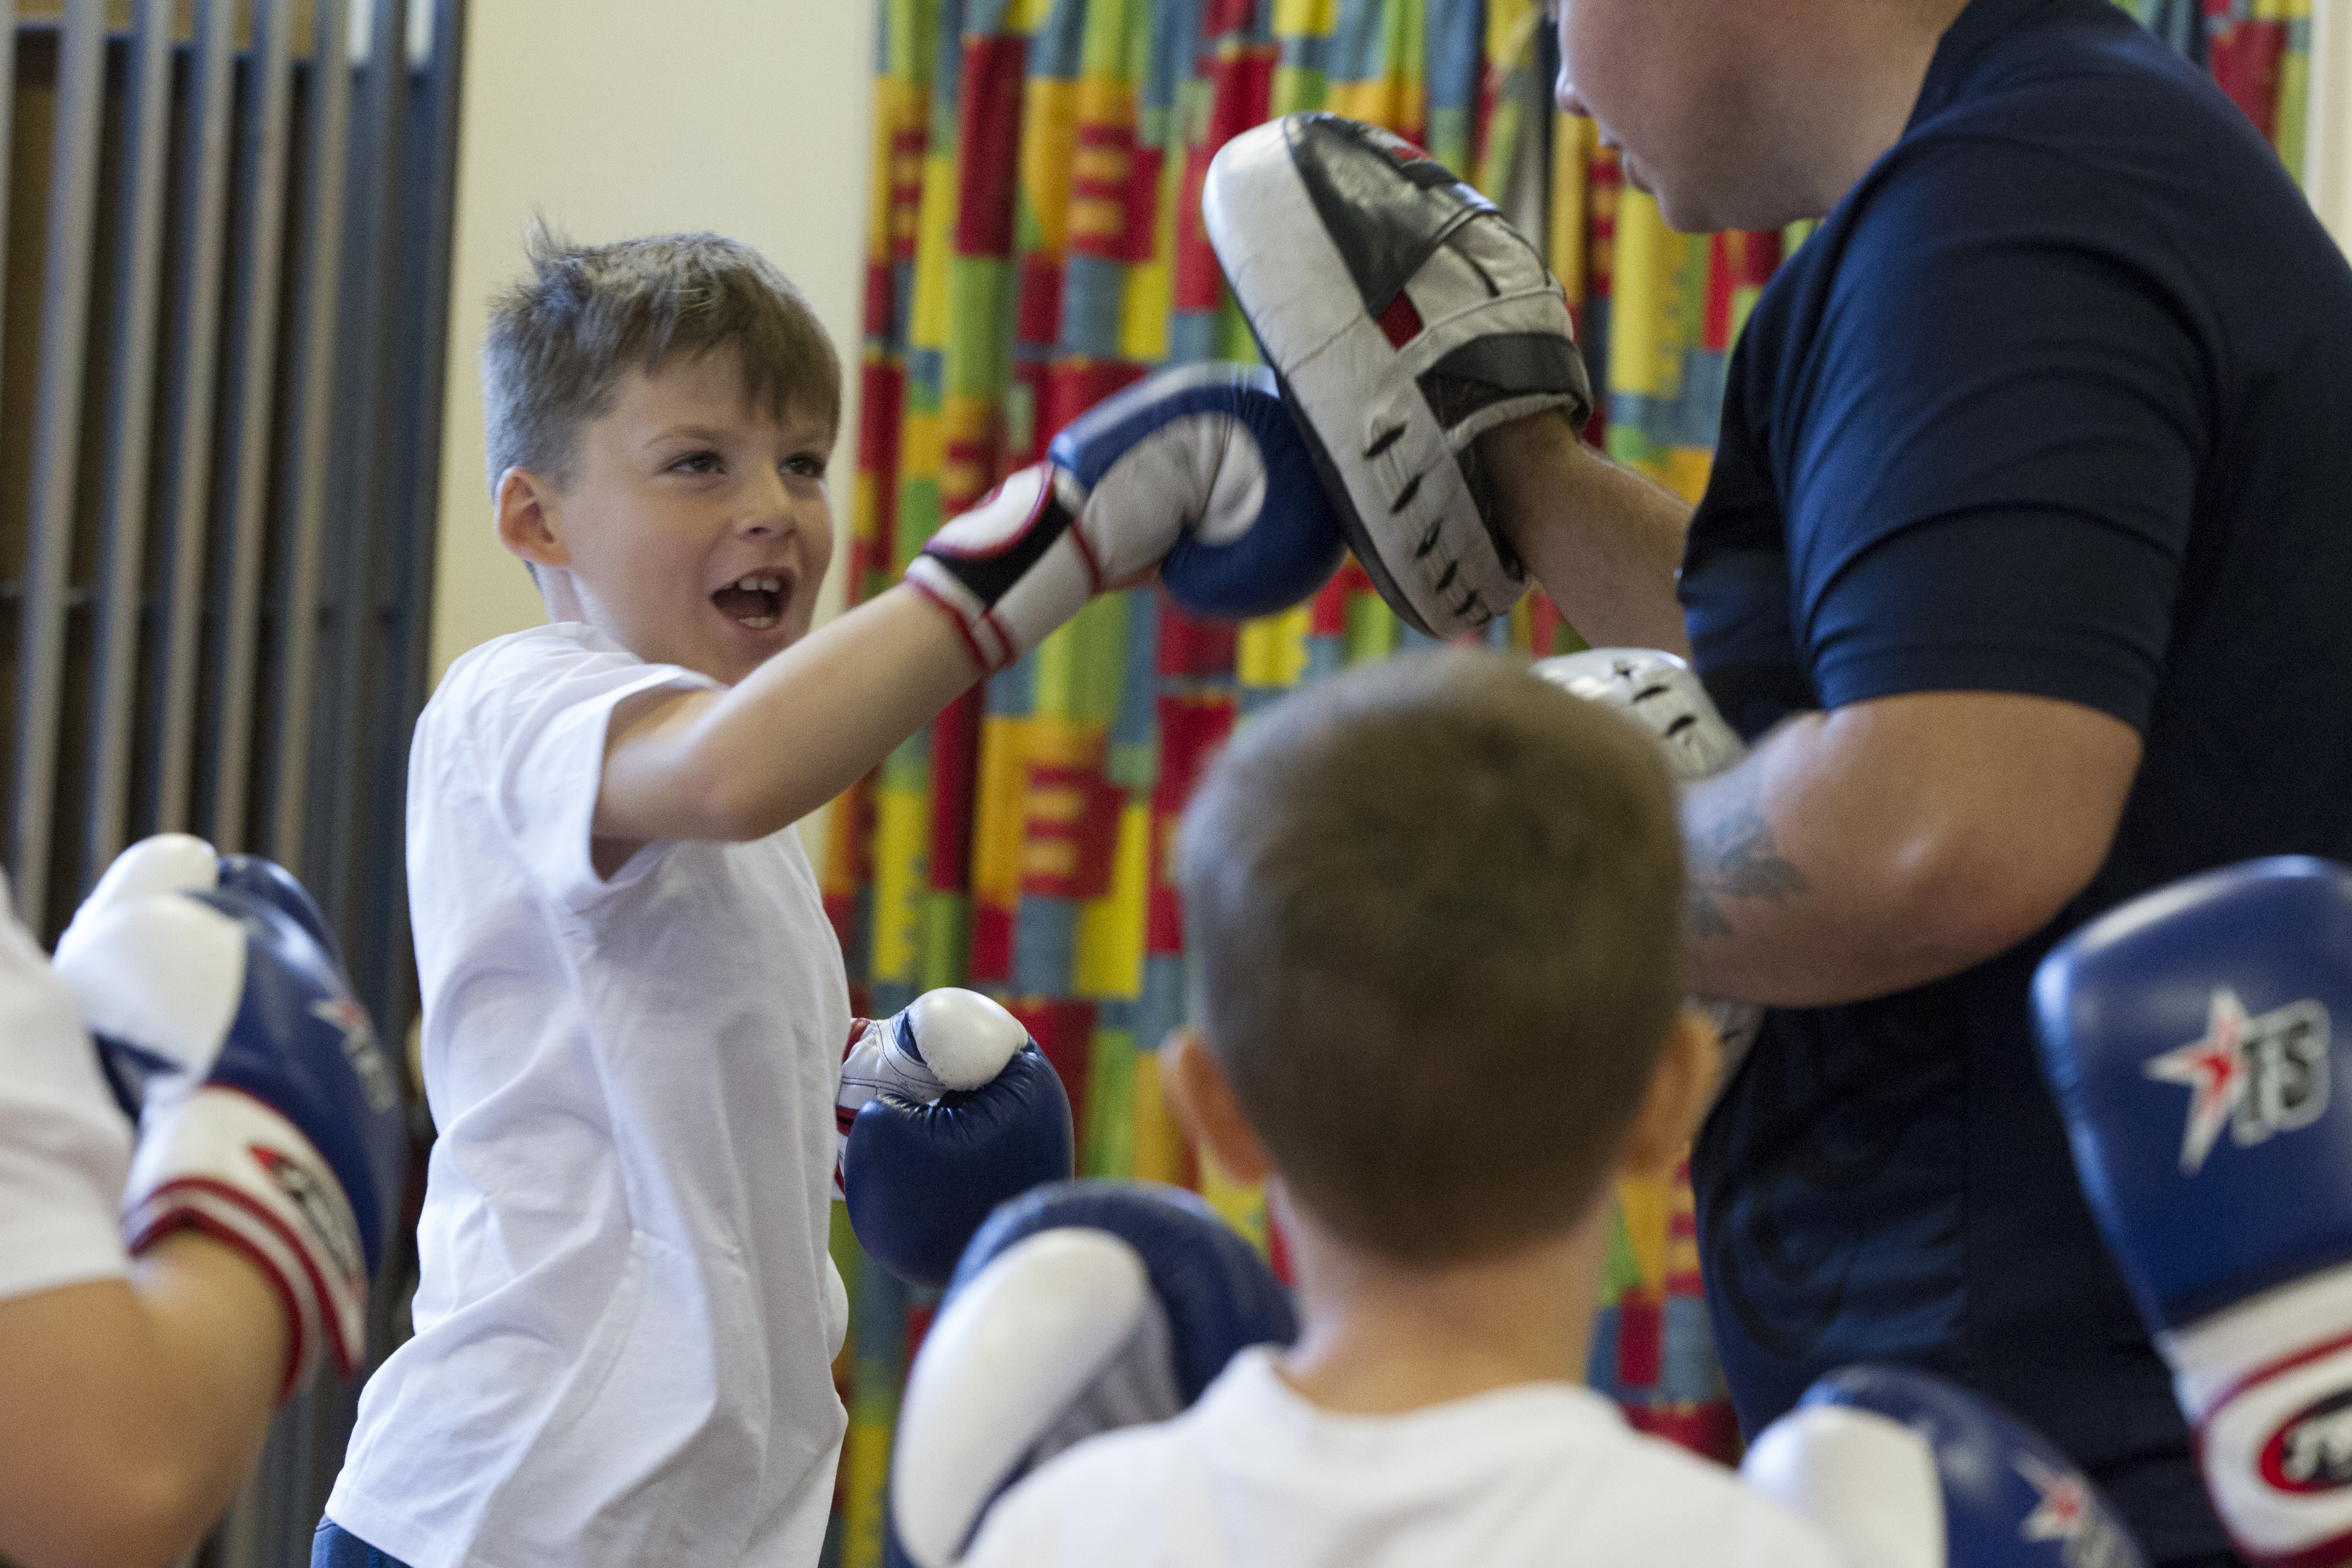 young boys enjoying using boxing gloves and pads